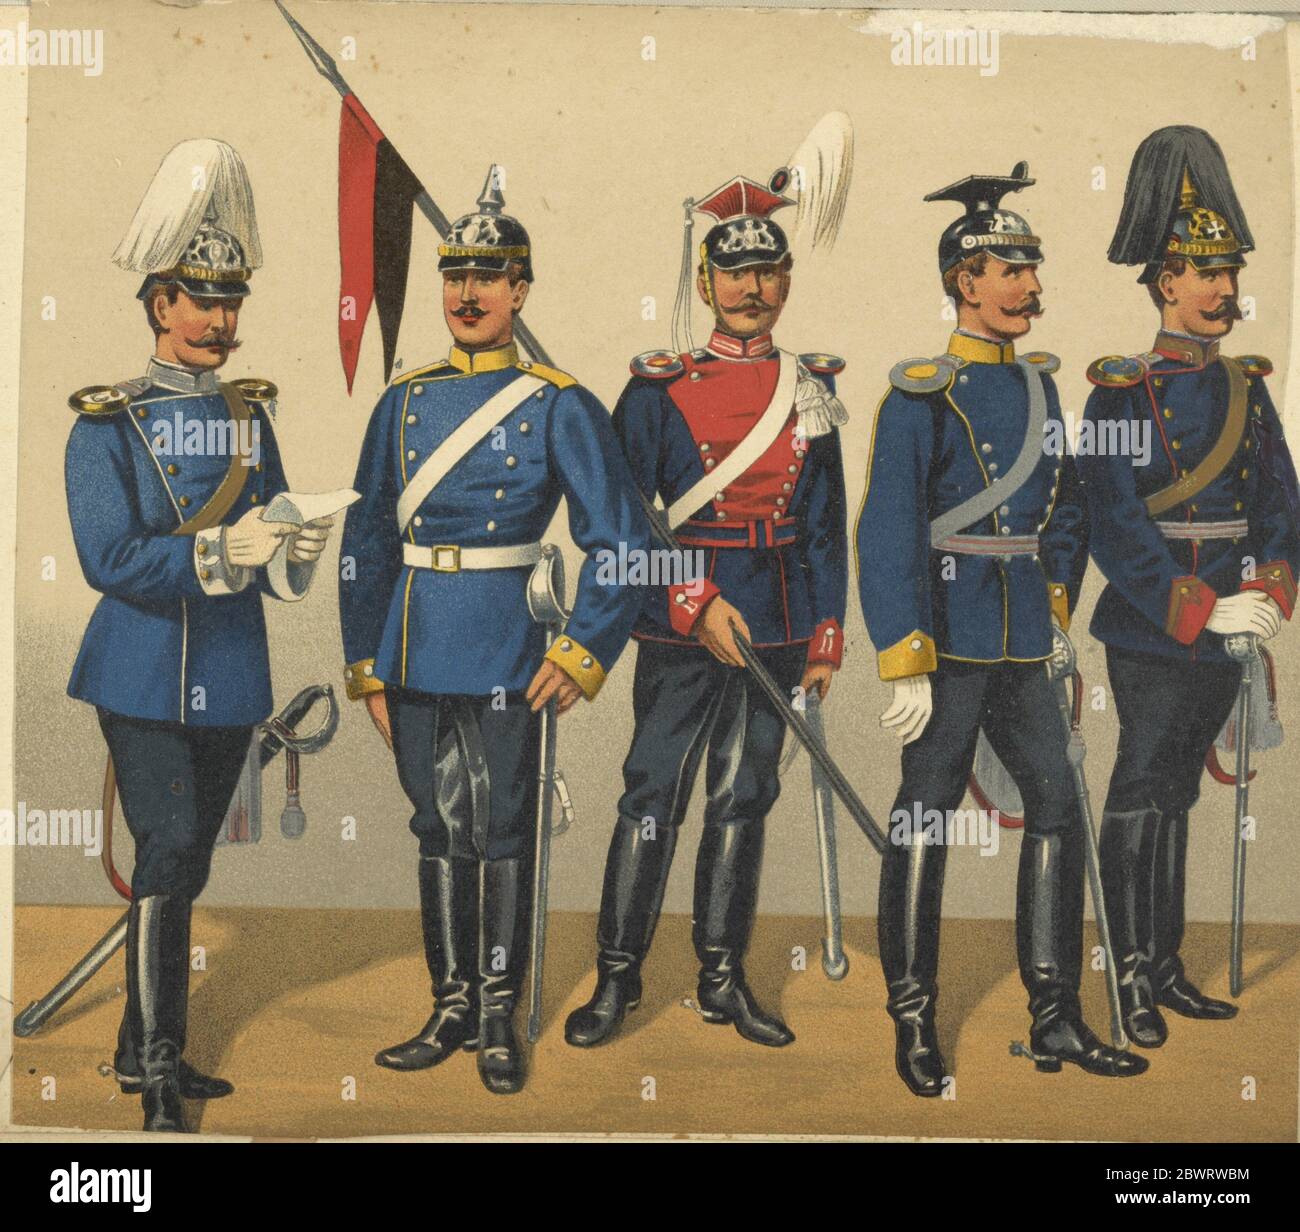 Germany, Württemberg, 1880-1900. Vinkhuijzen, Hendrik Jacobus (Collector).  The Vinkhuijzen collection of military uniforms Germany Germany Stock Photo  - Alamy